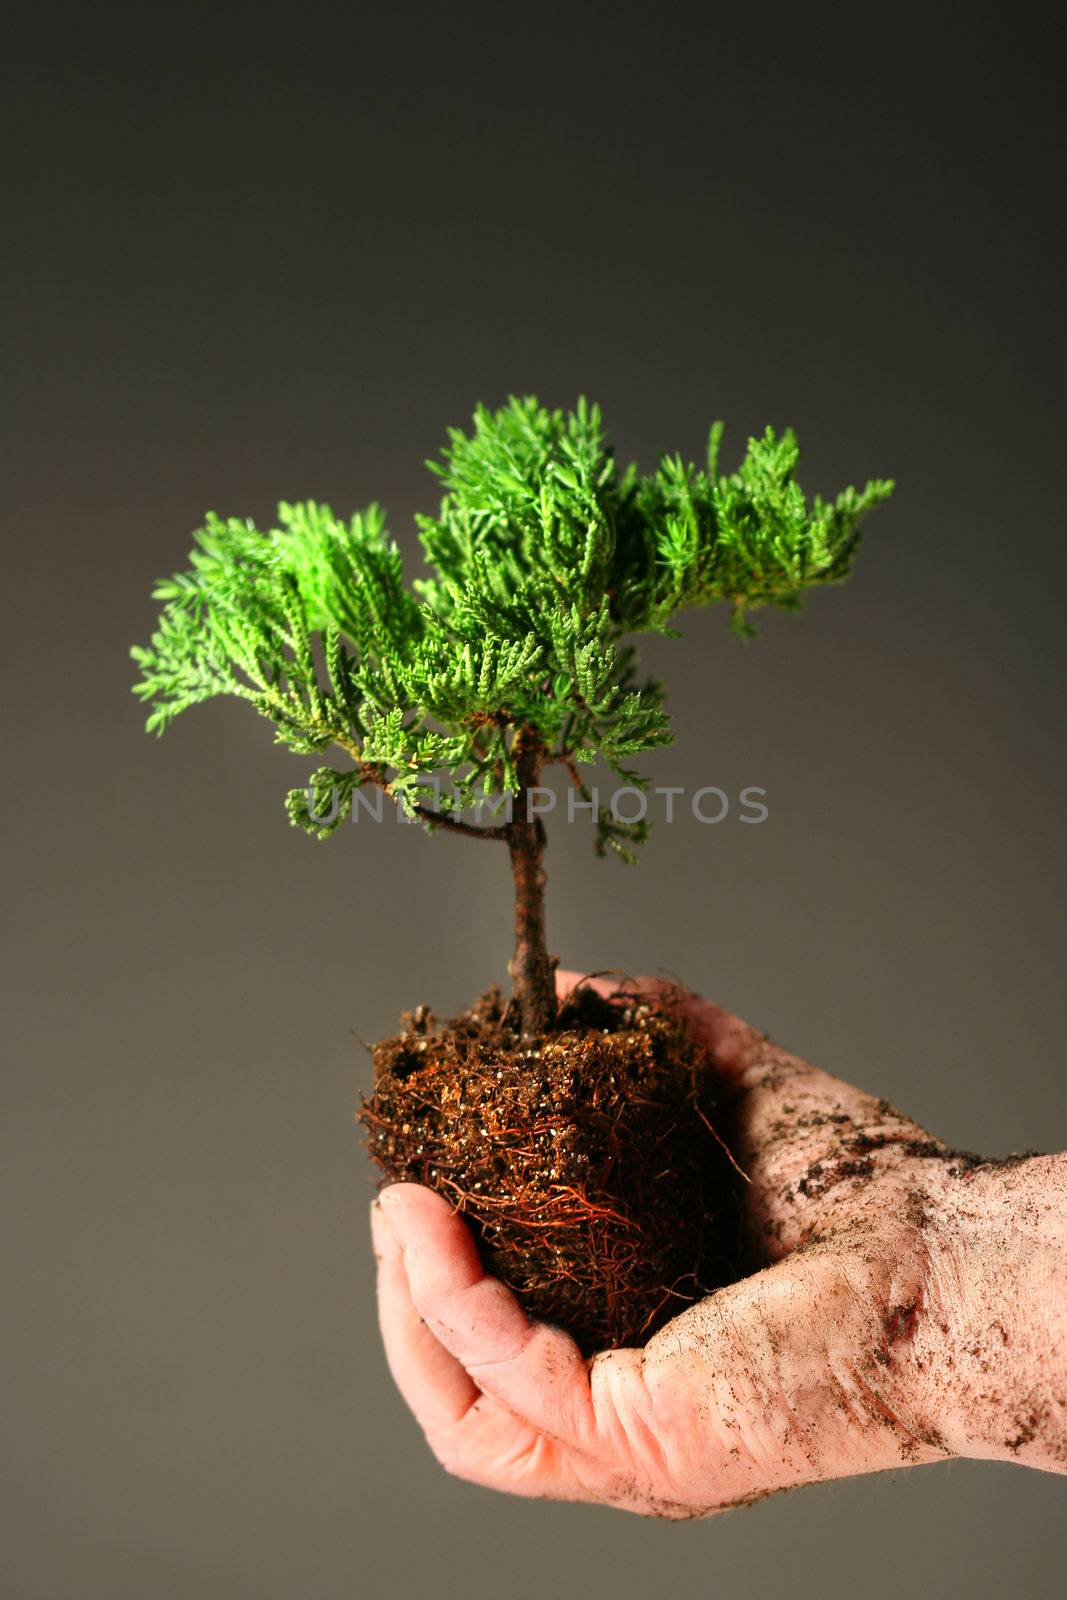 Soiled hand holding a small tree against dark background